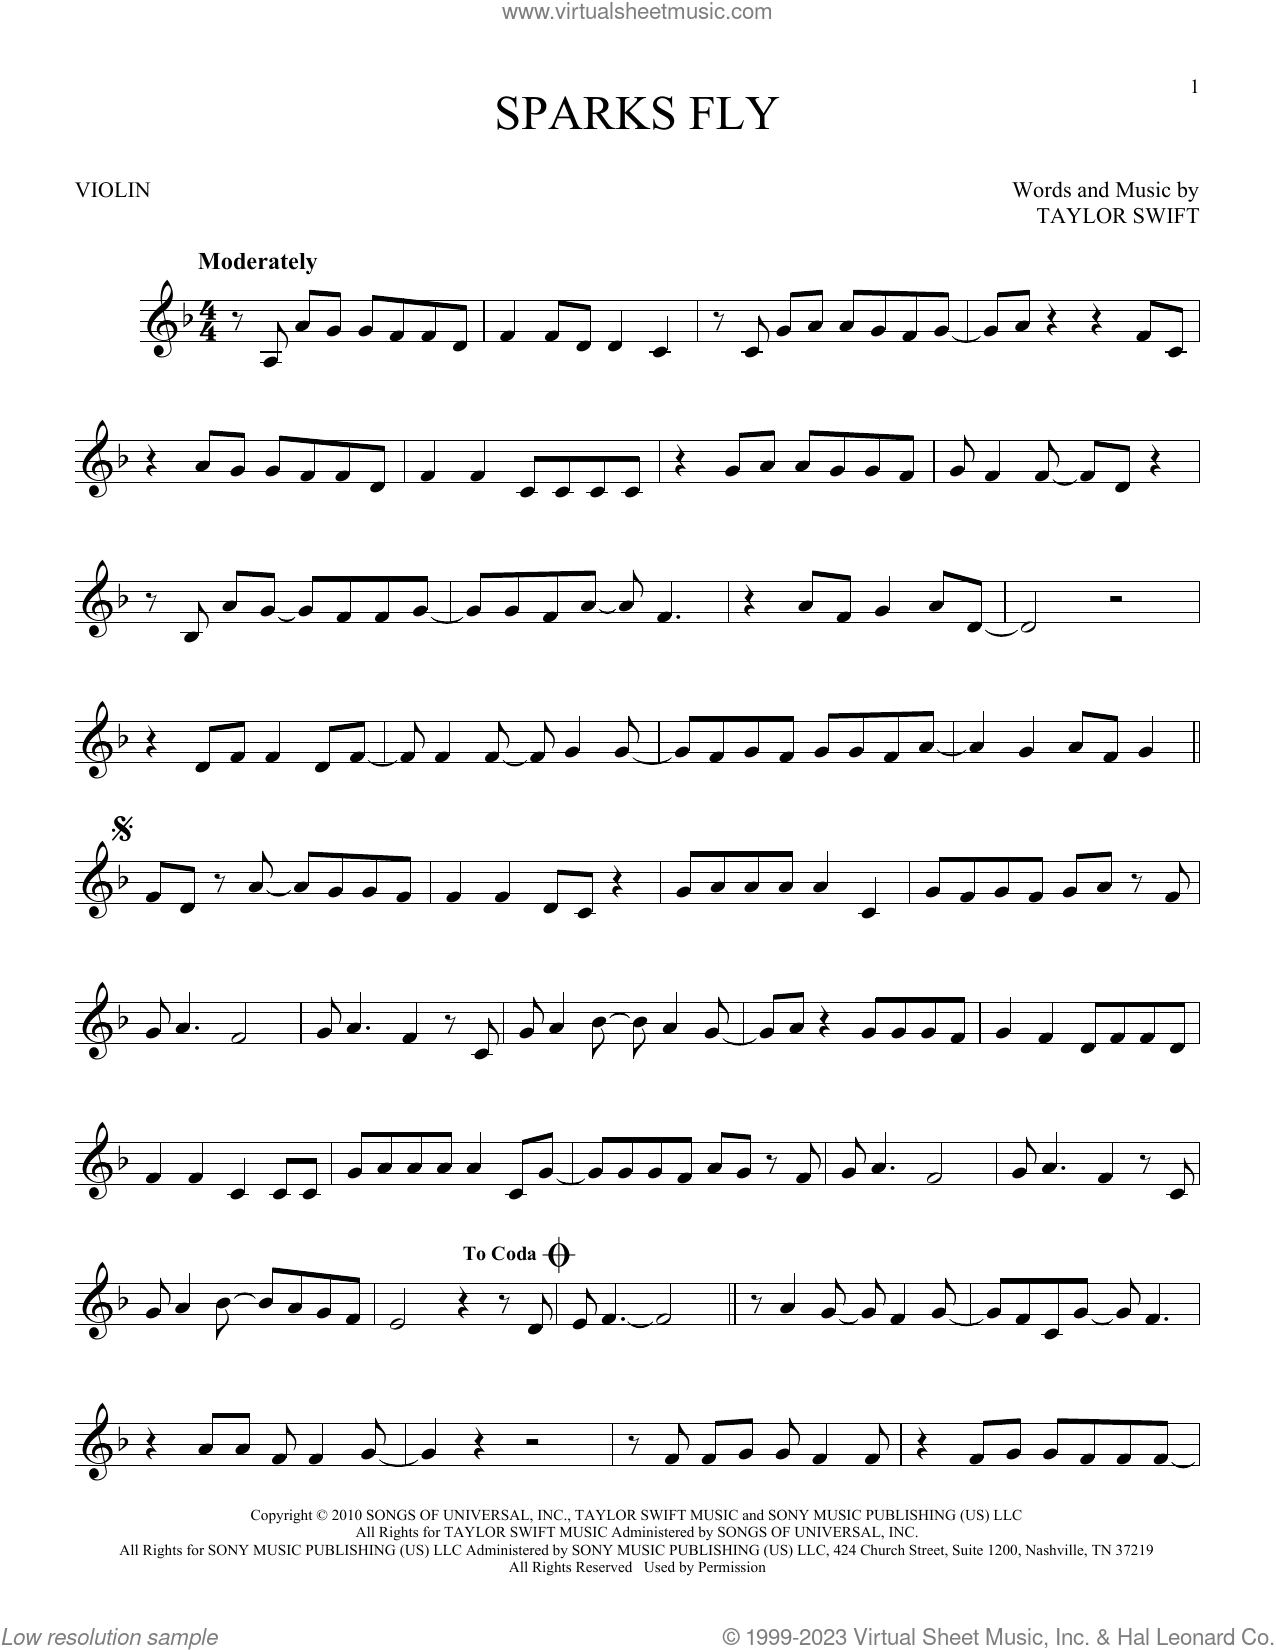 Print and Download Learning To Fly Sheet Music; Sheet Music